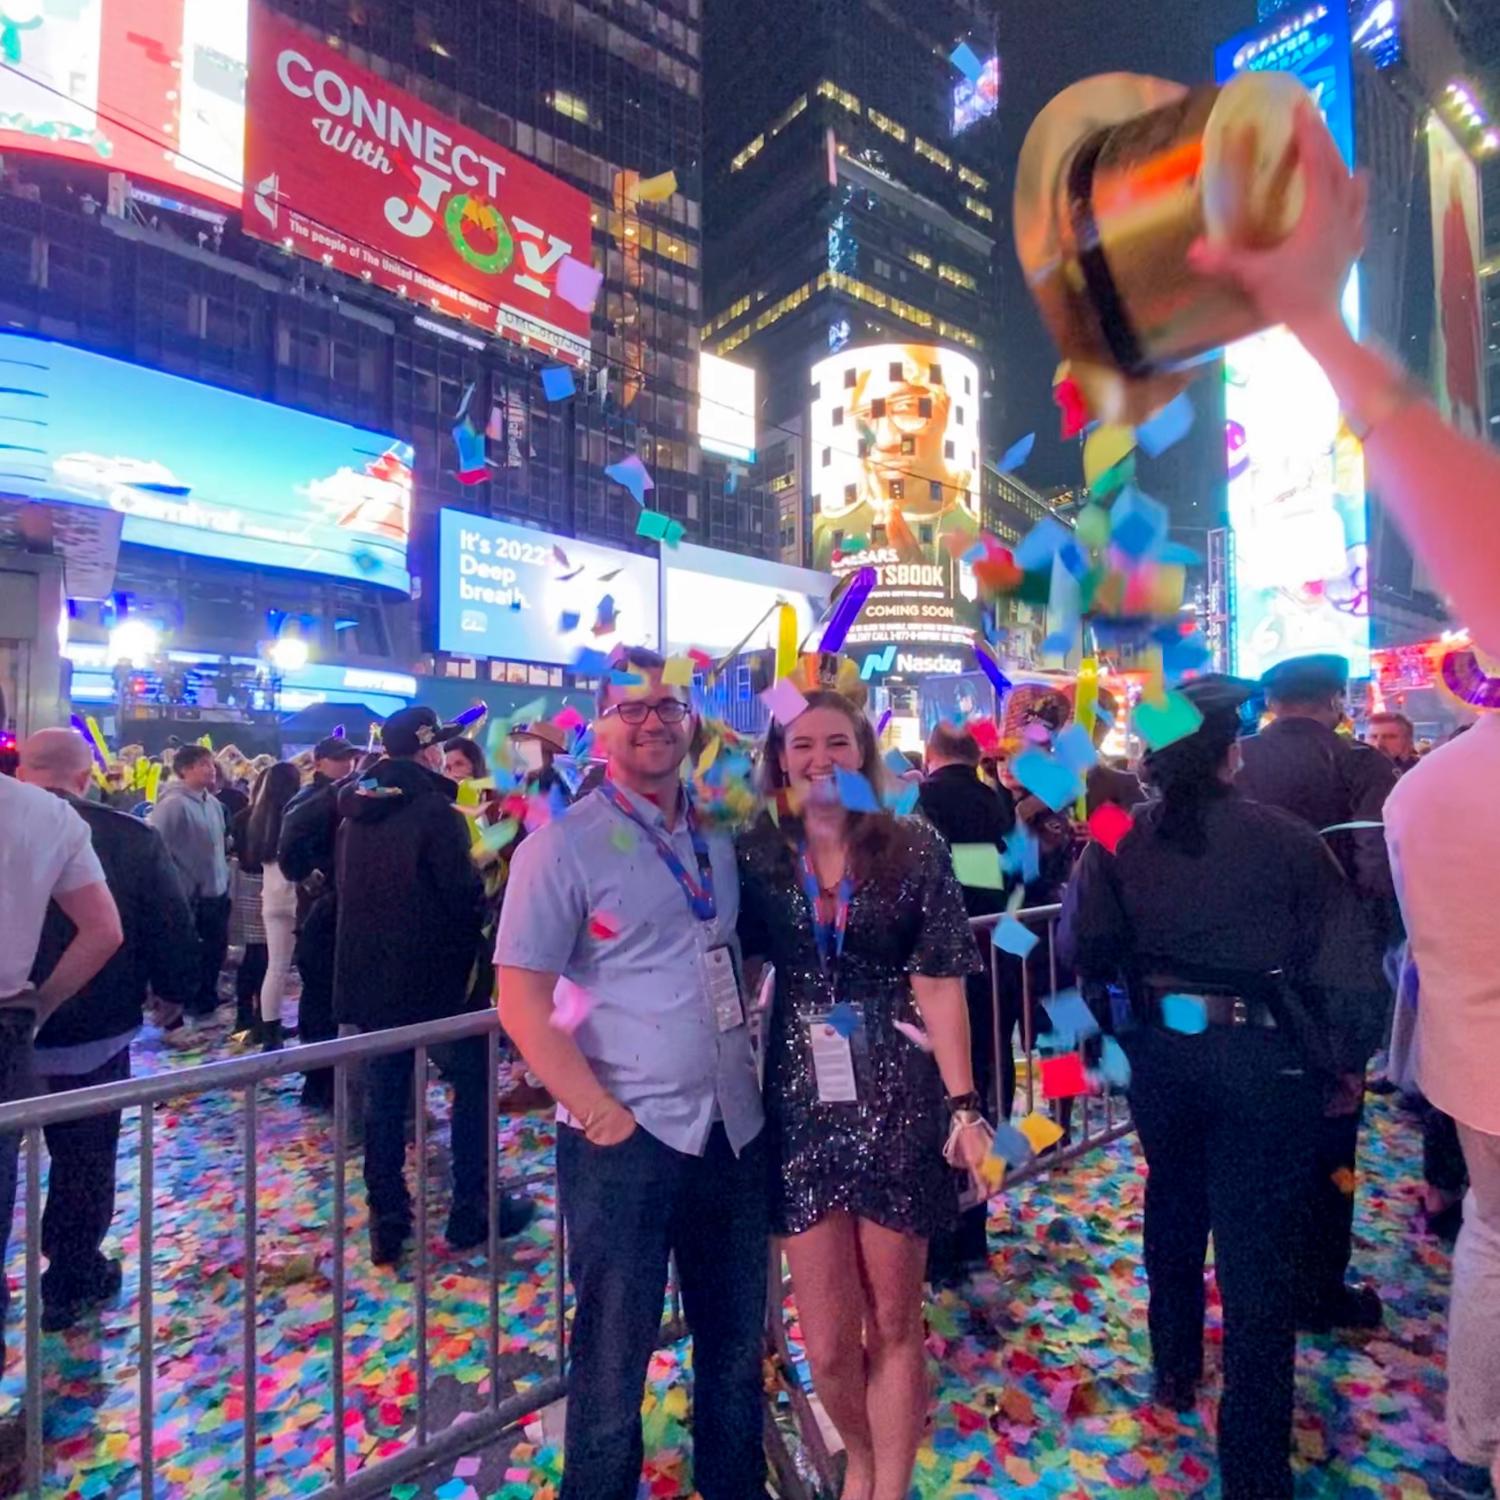 Ringing in the new year in Times Square, 2021-2022